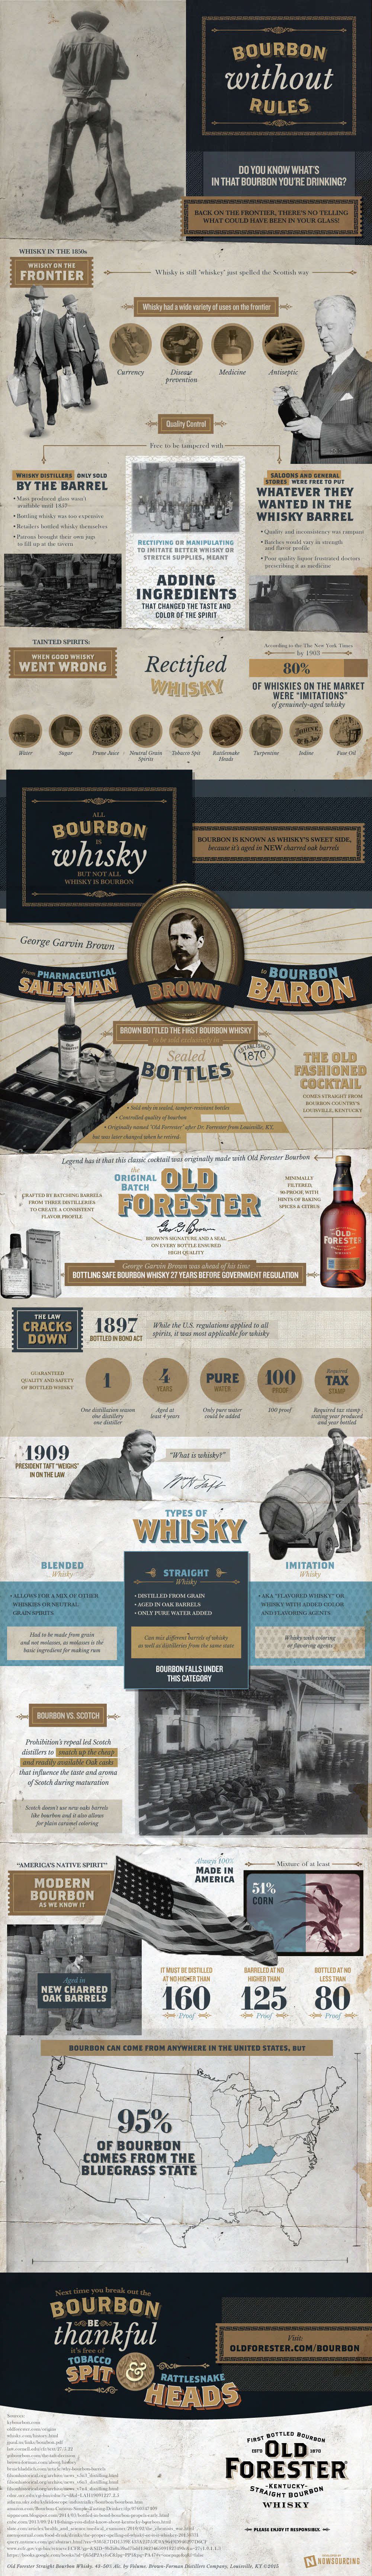 Old Forester Infographic 2015 final